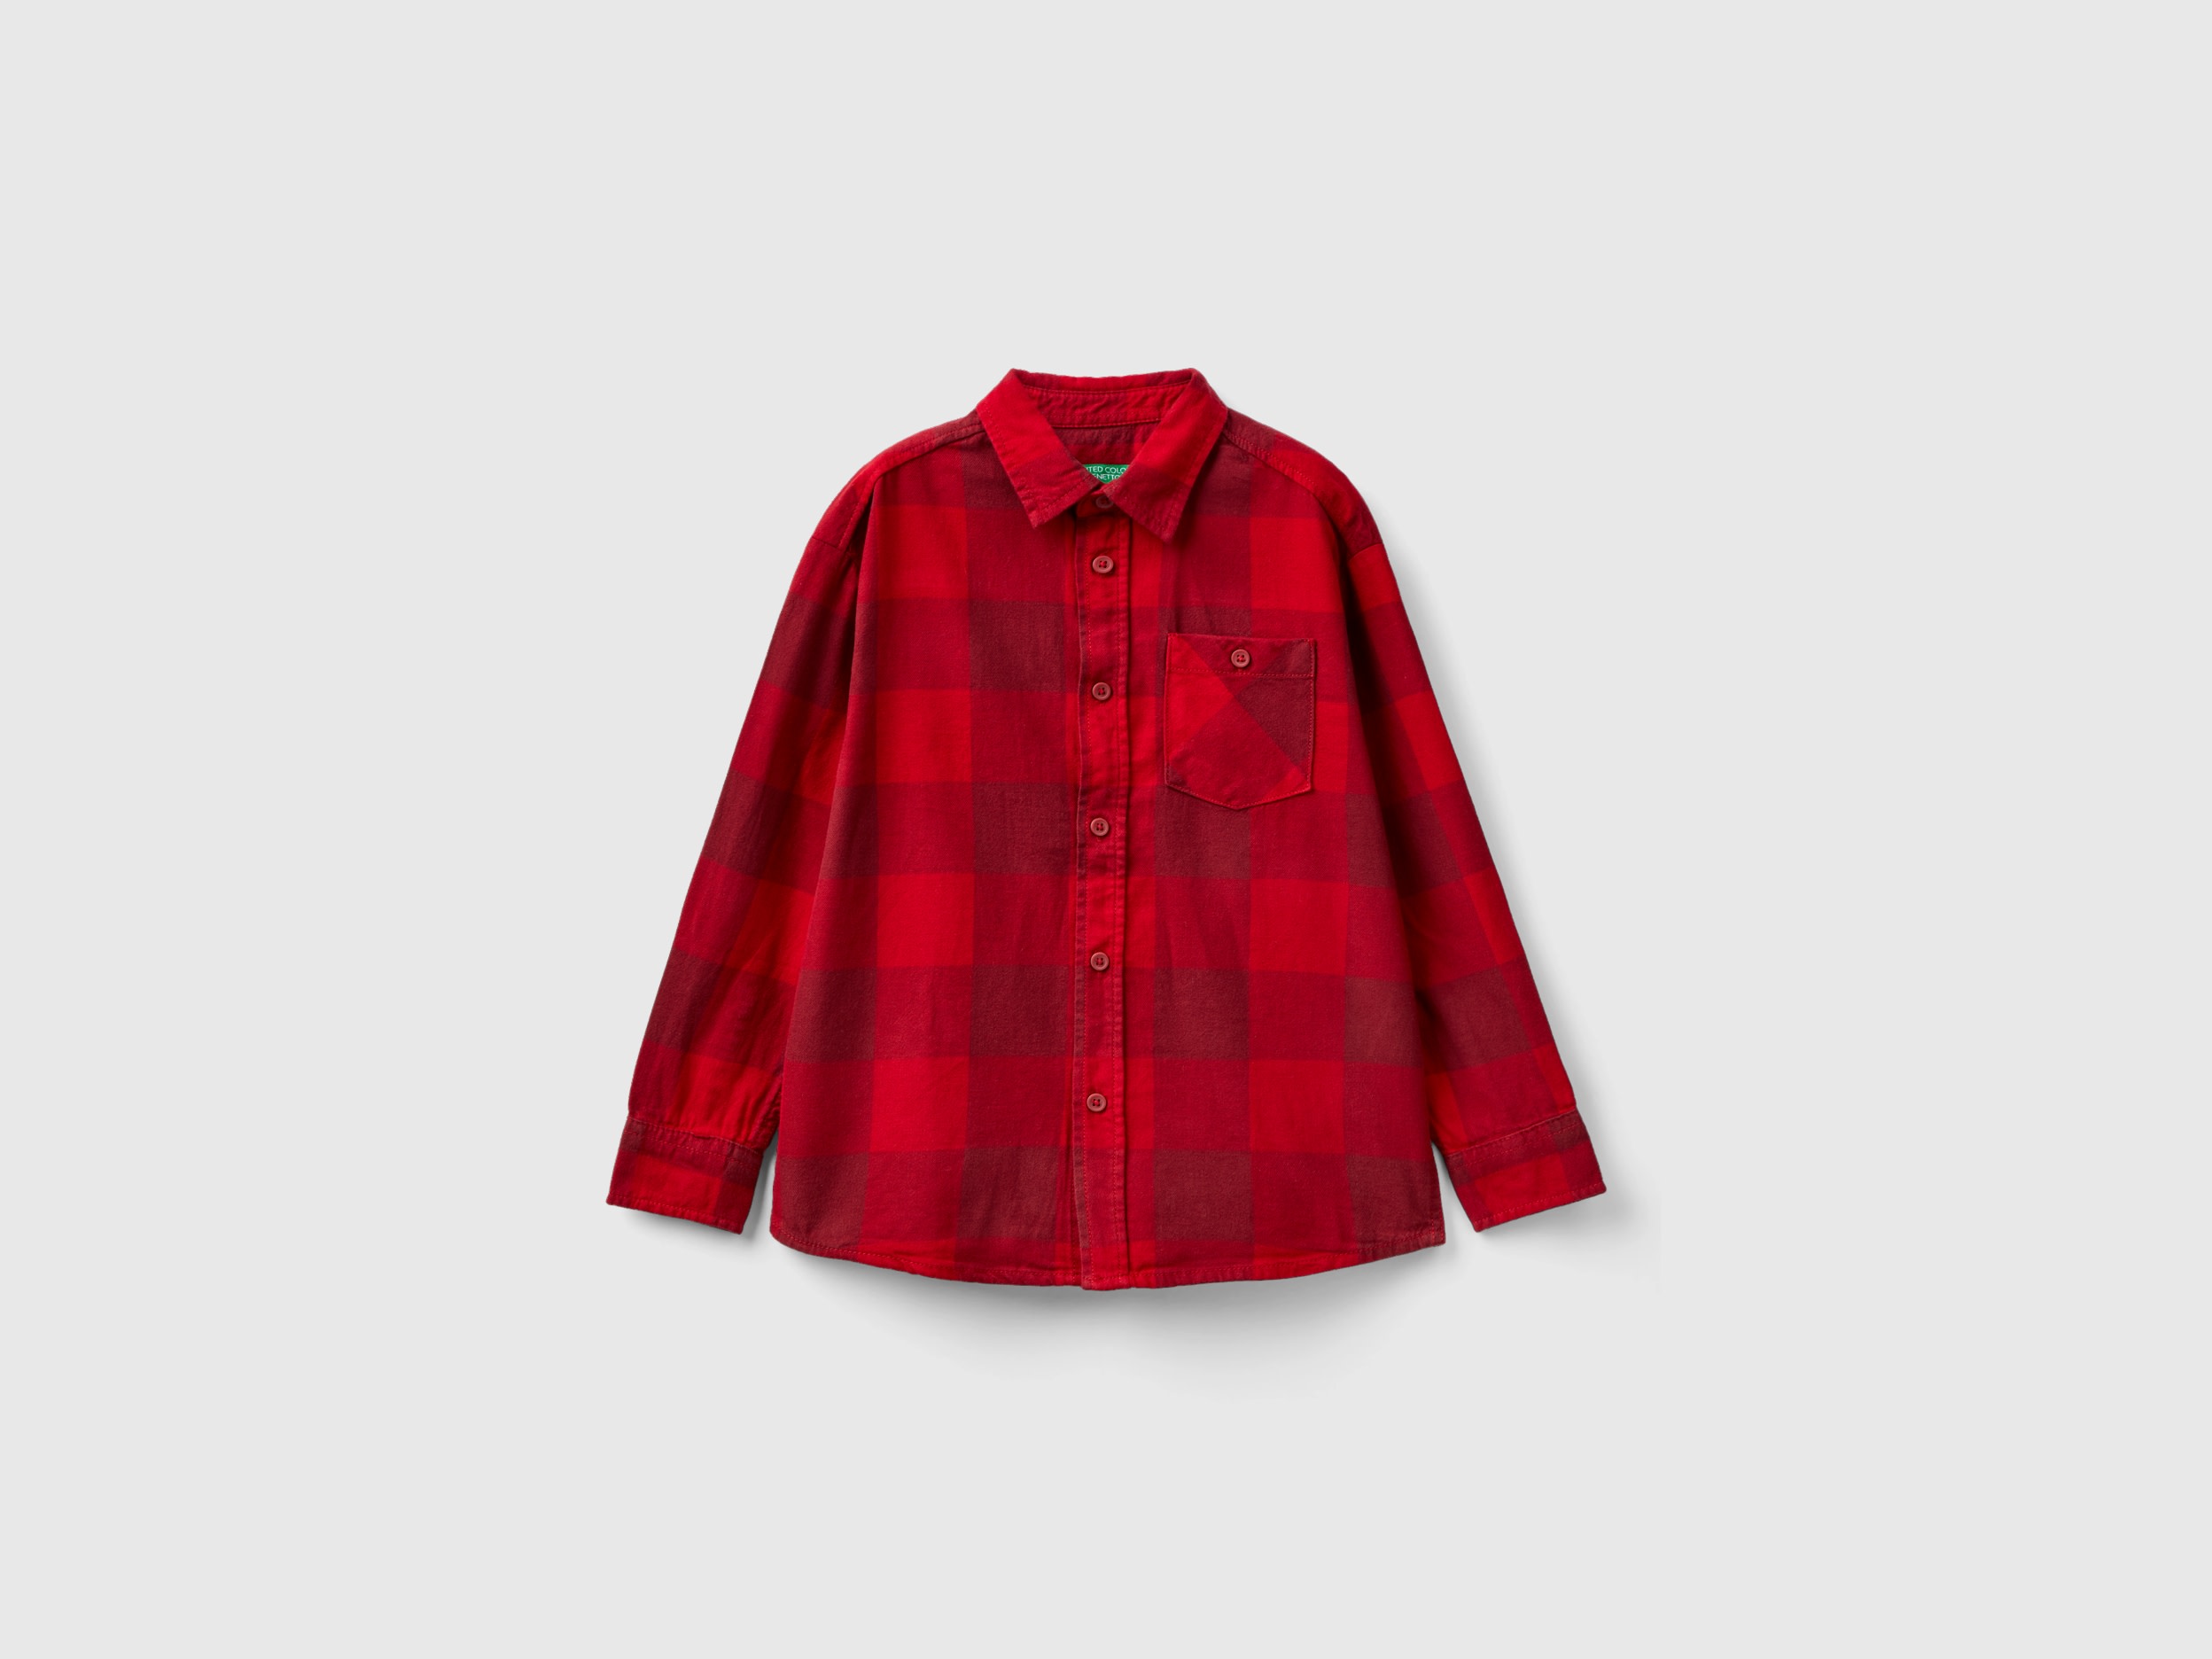 Benetton, Plaid Shirt In 100% Cotton, size 2XL, Red, Kids